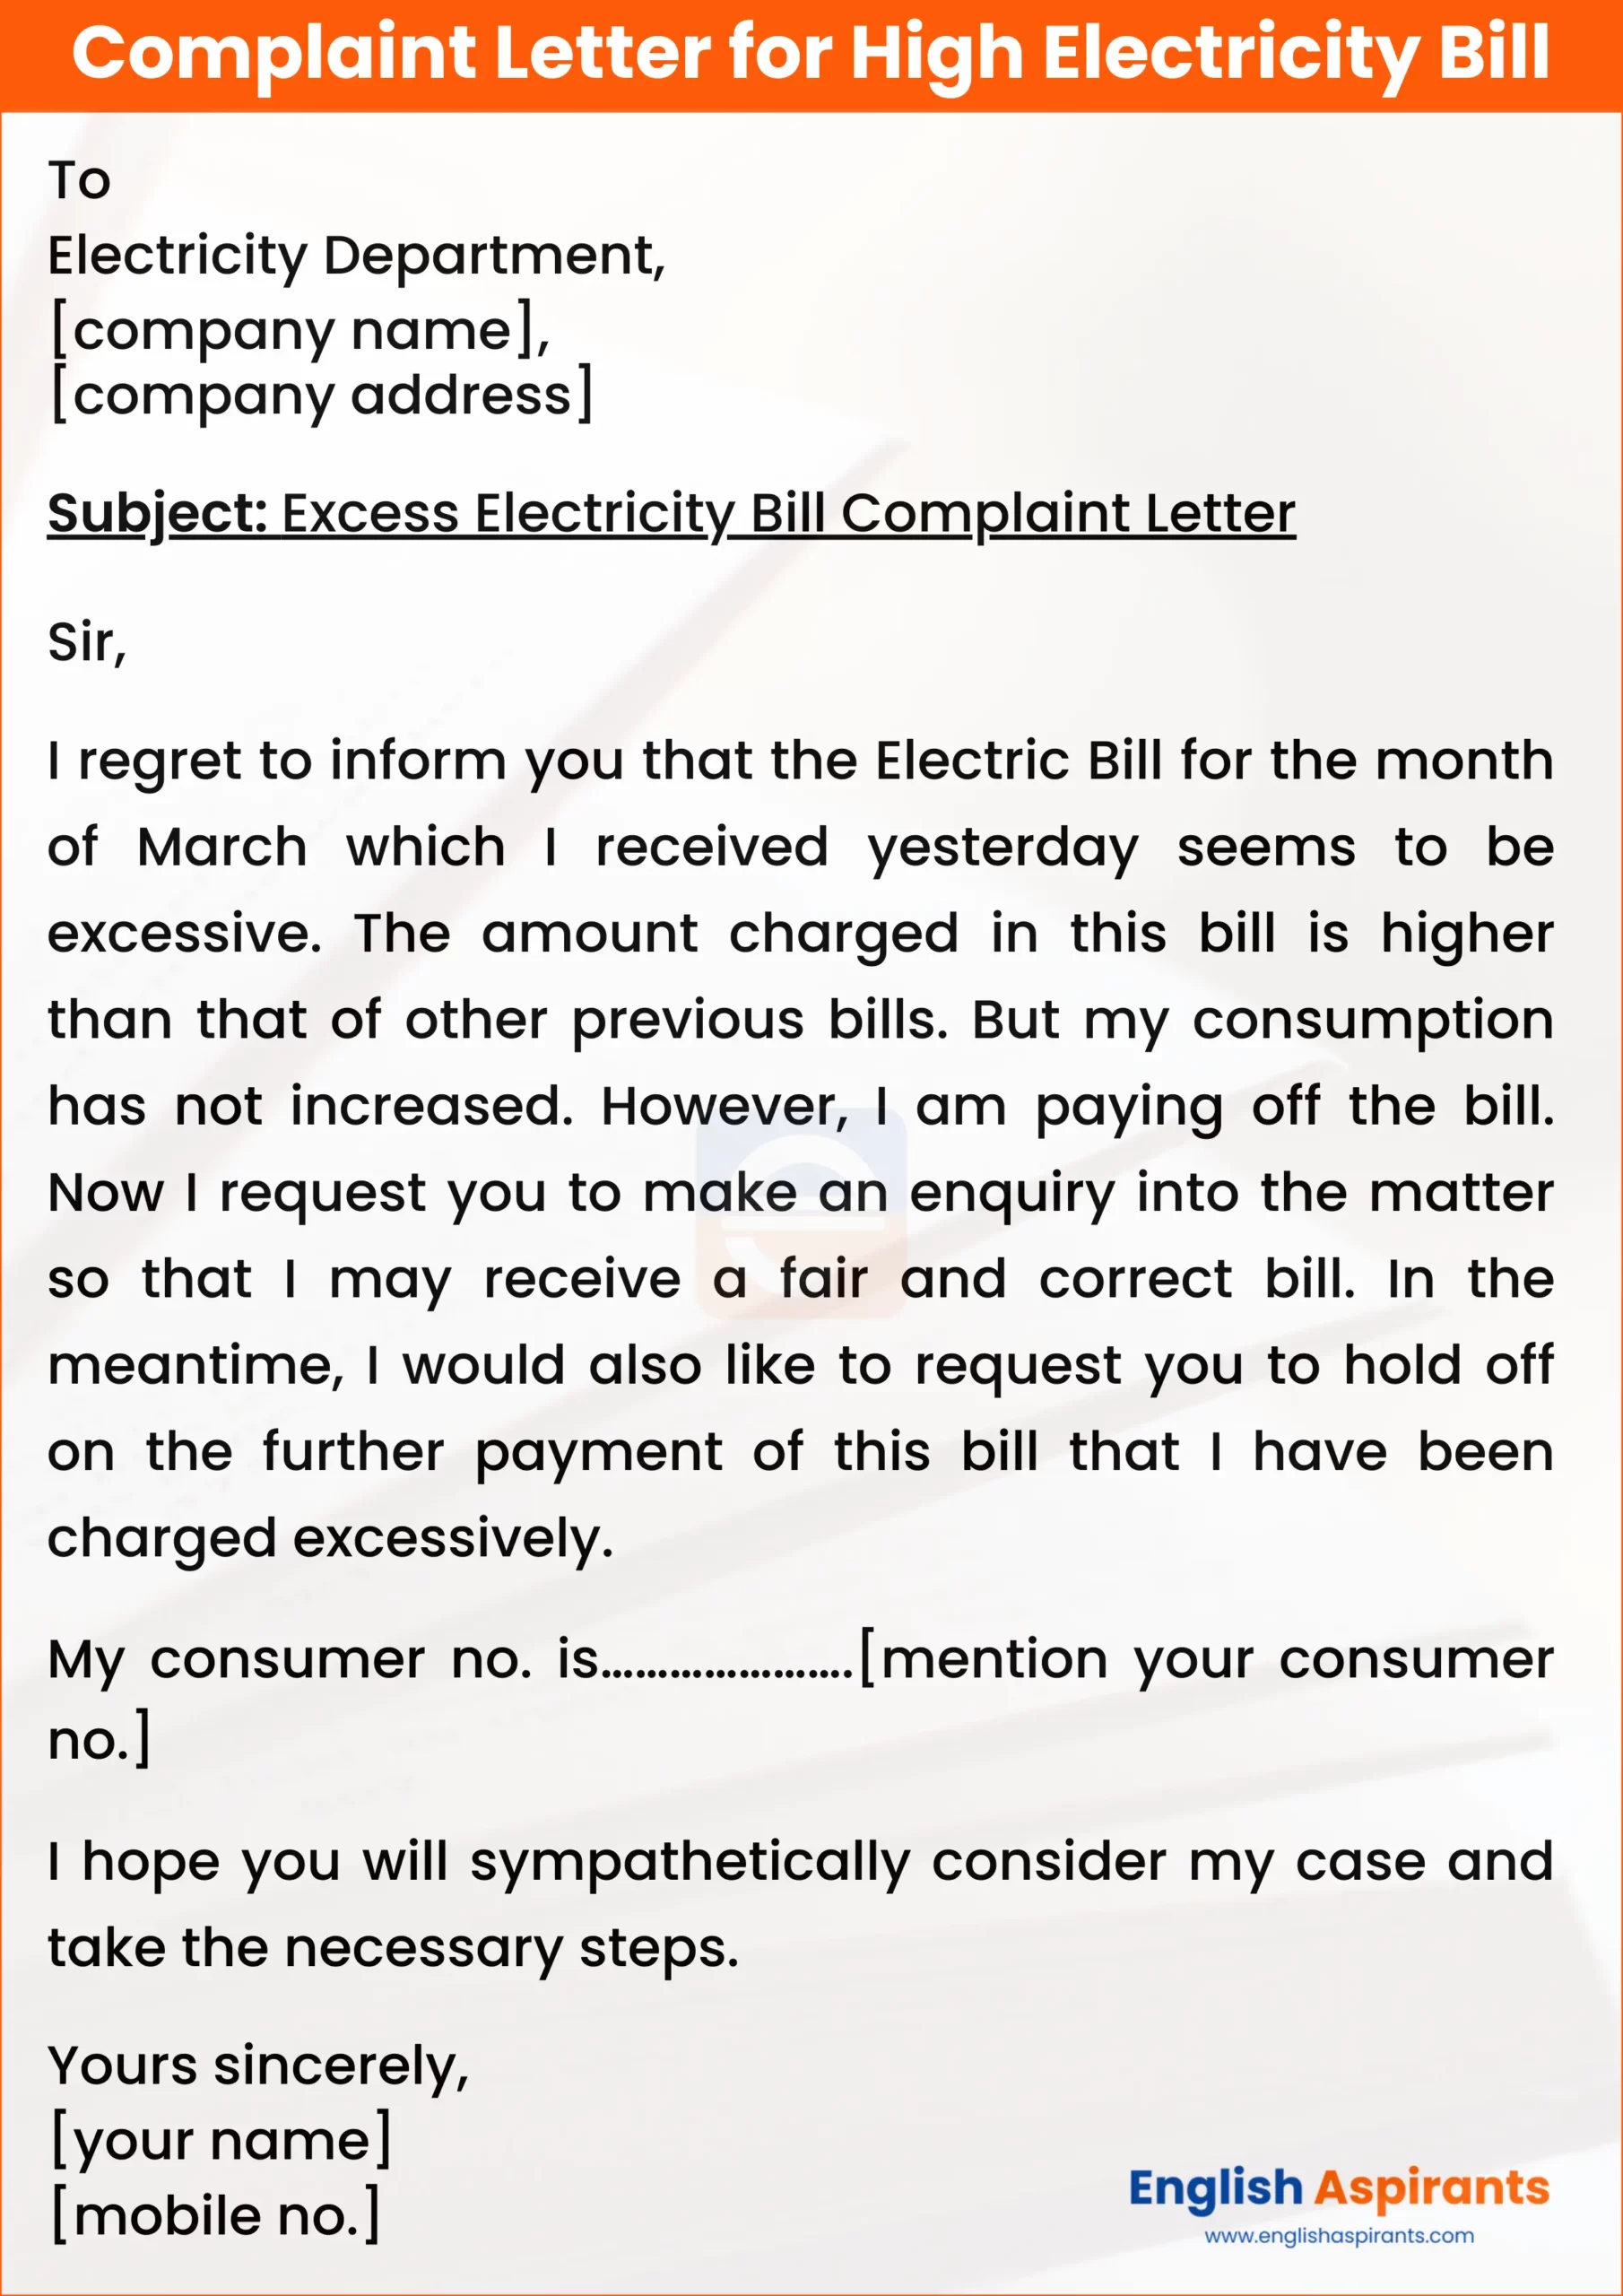 Complaint Letter for High Electricity Bill in English